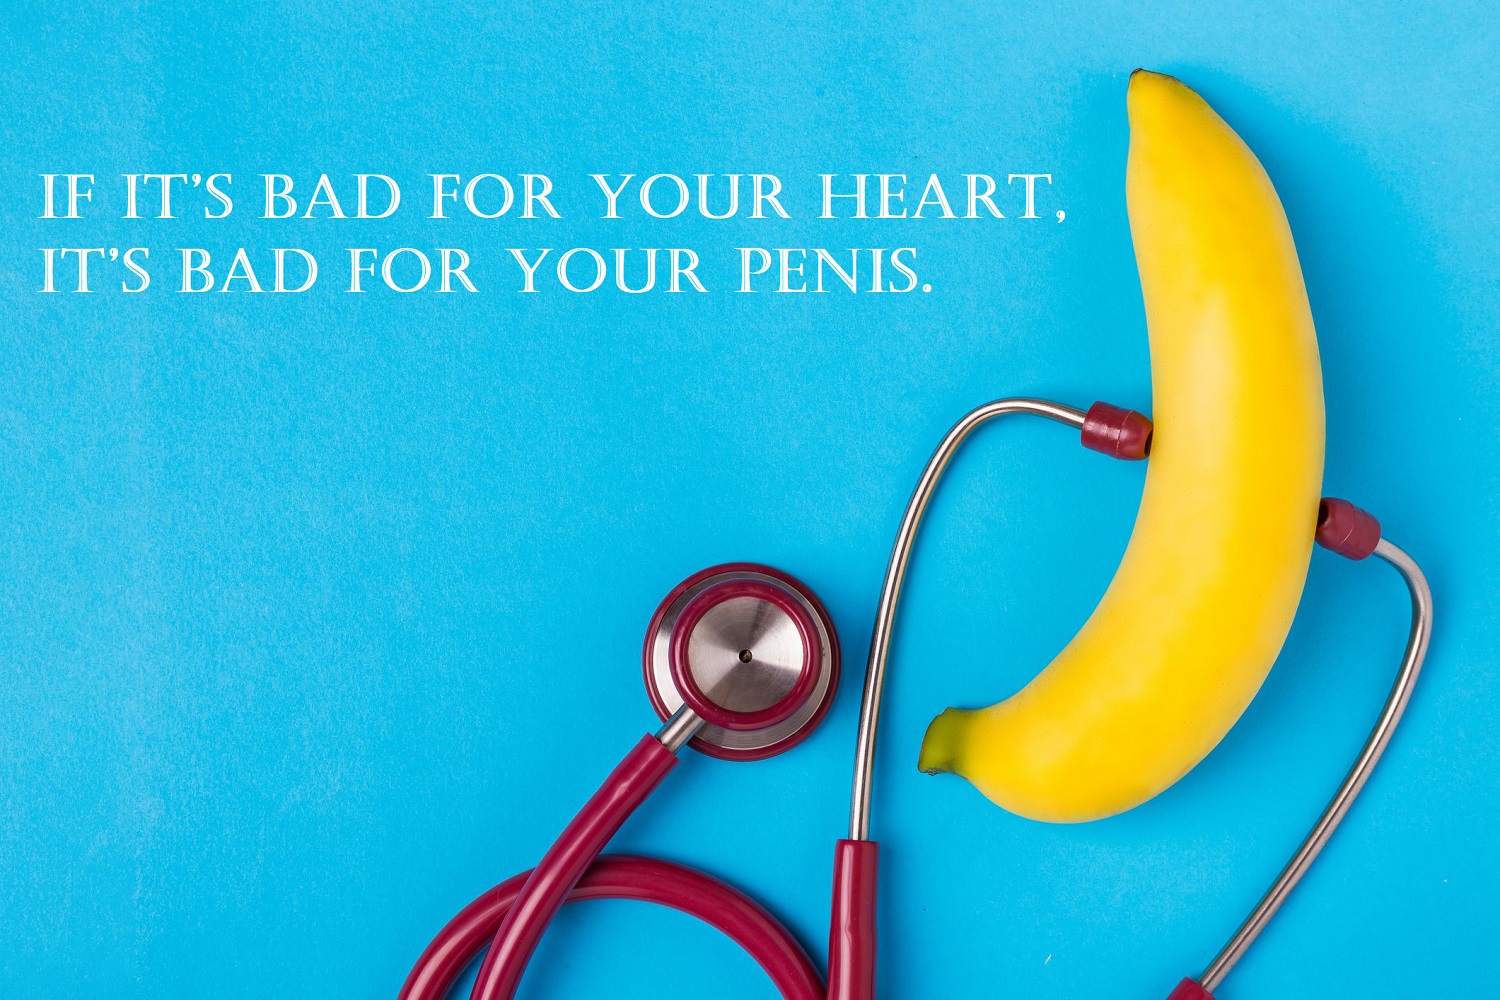 If it’s bad for Your Heart, it’s bad for Your Penis.